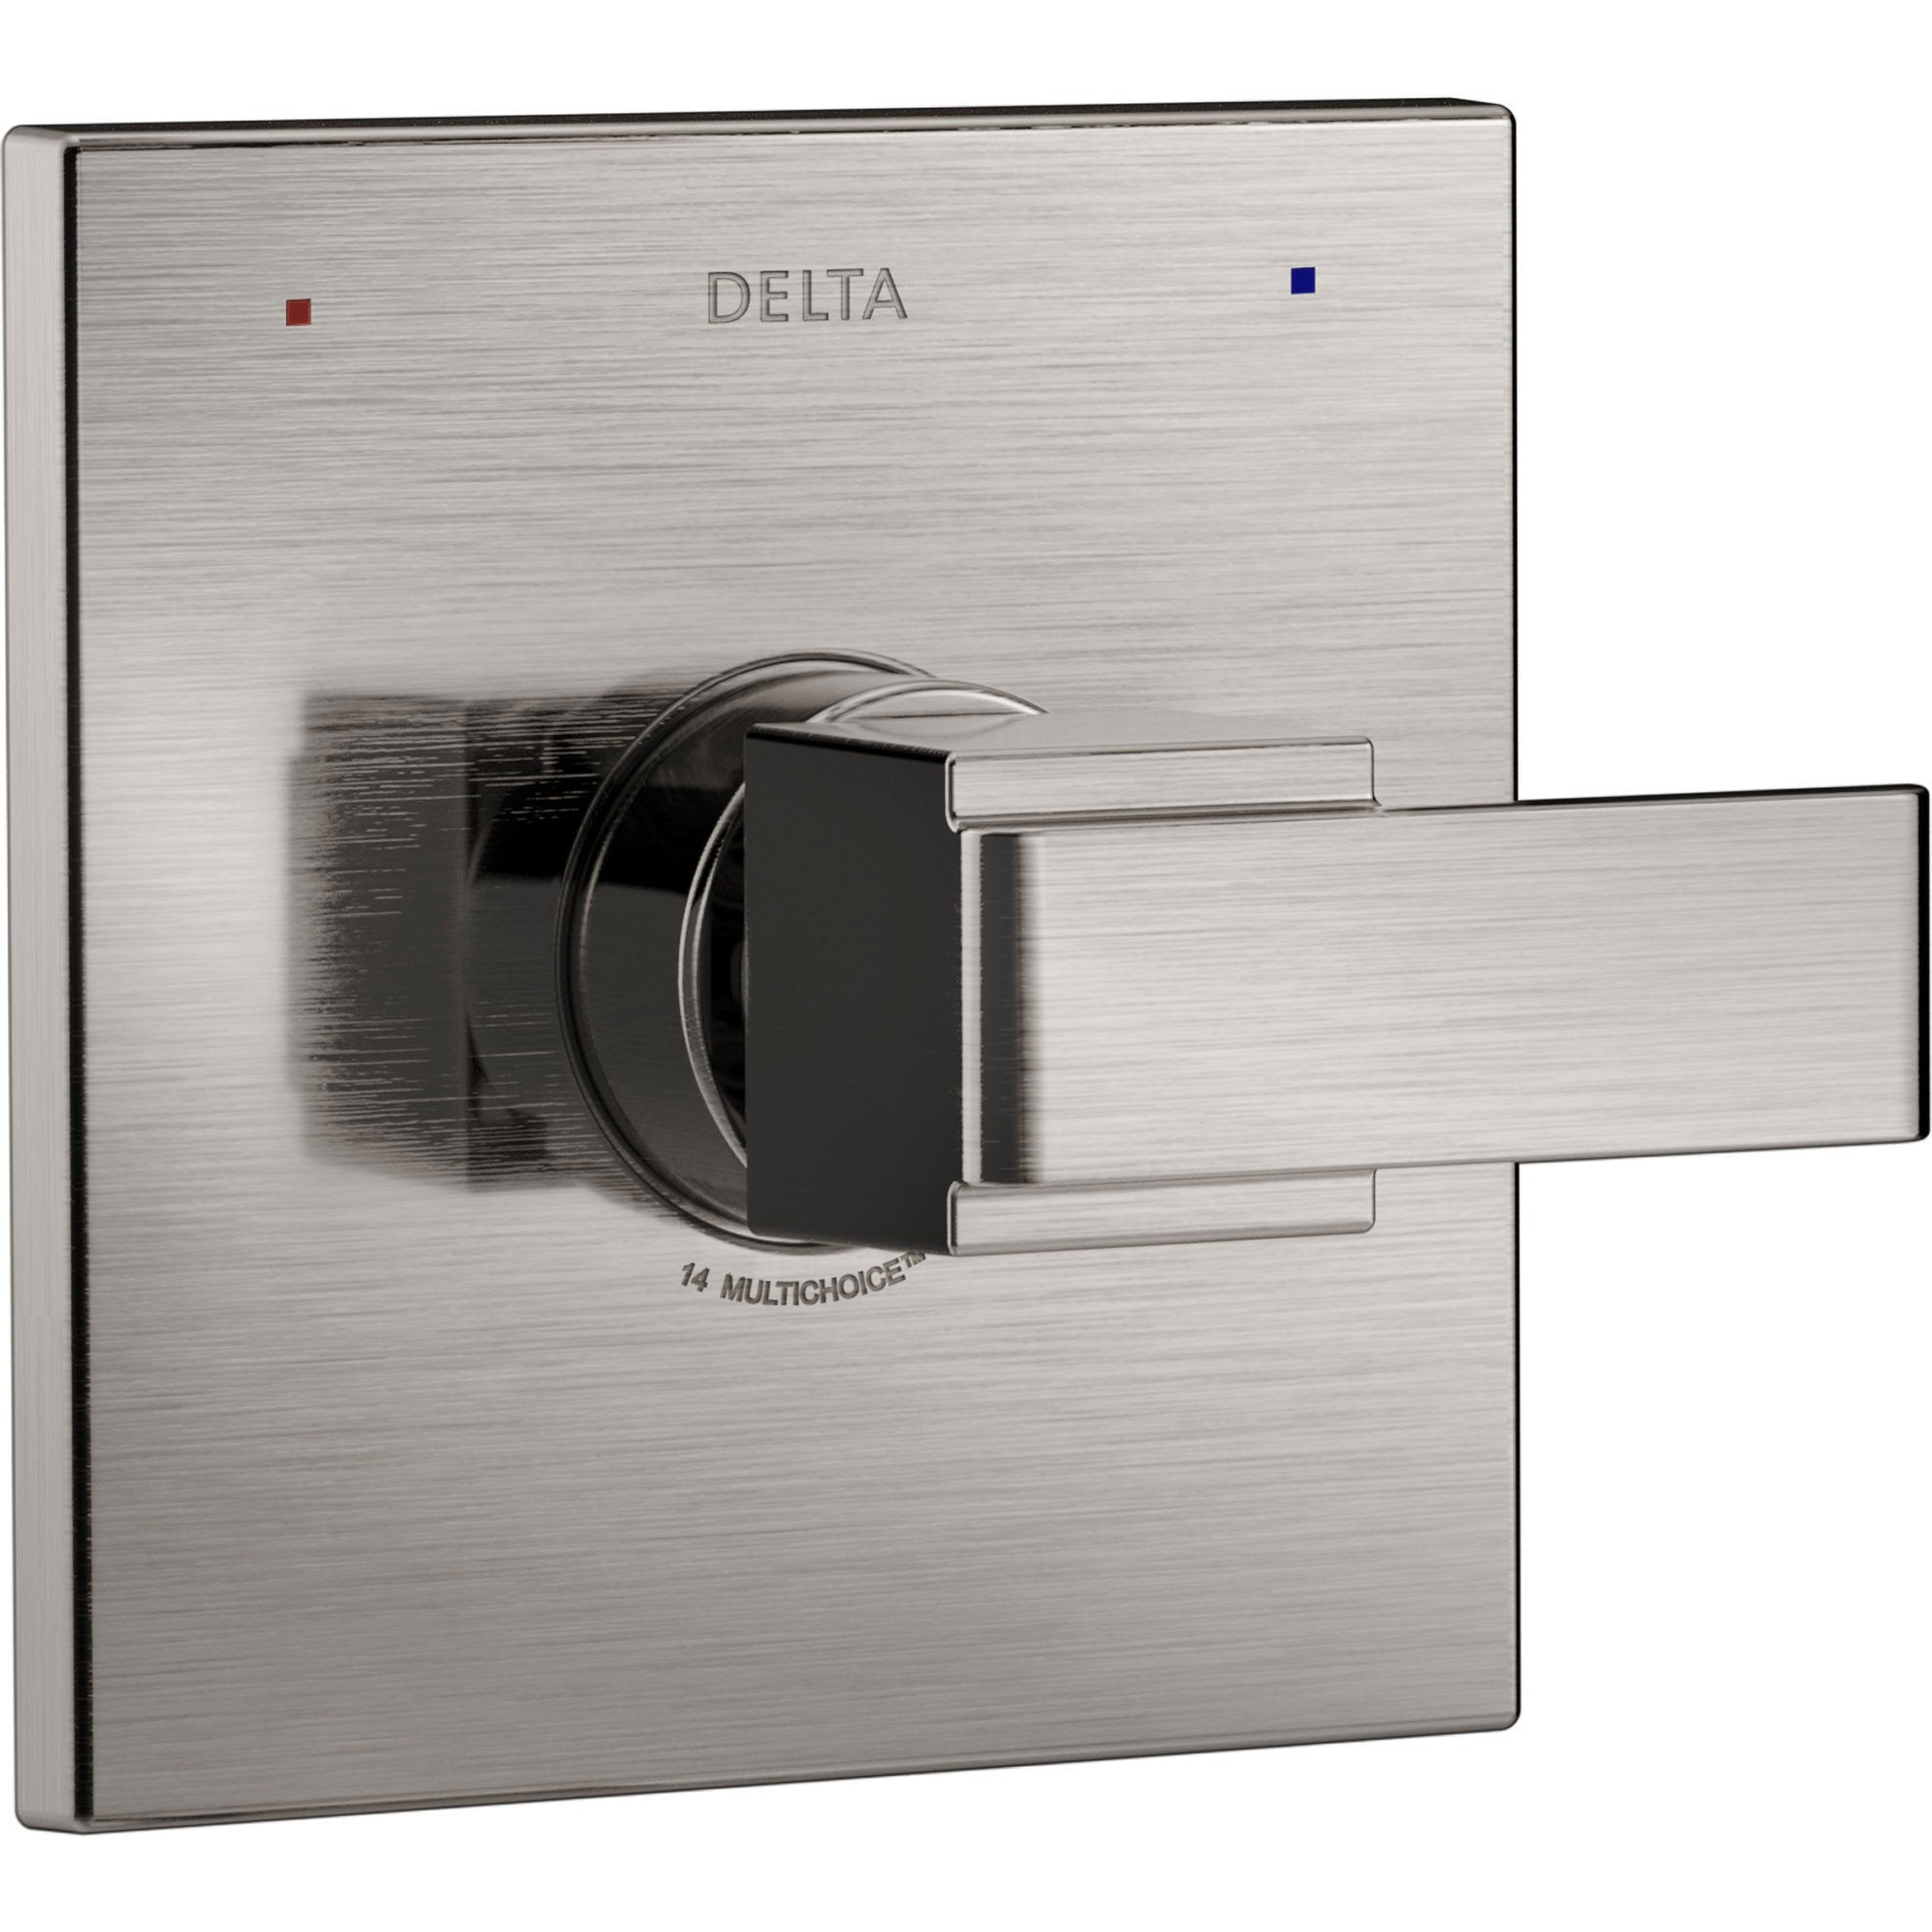 Delta Ara Modern Monitor 14 Series Stainless Steel Finish Square Single Handle Pressure Balanced Shower Faucet Control INCLUDES Rough-in Valve with Stops D1253V